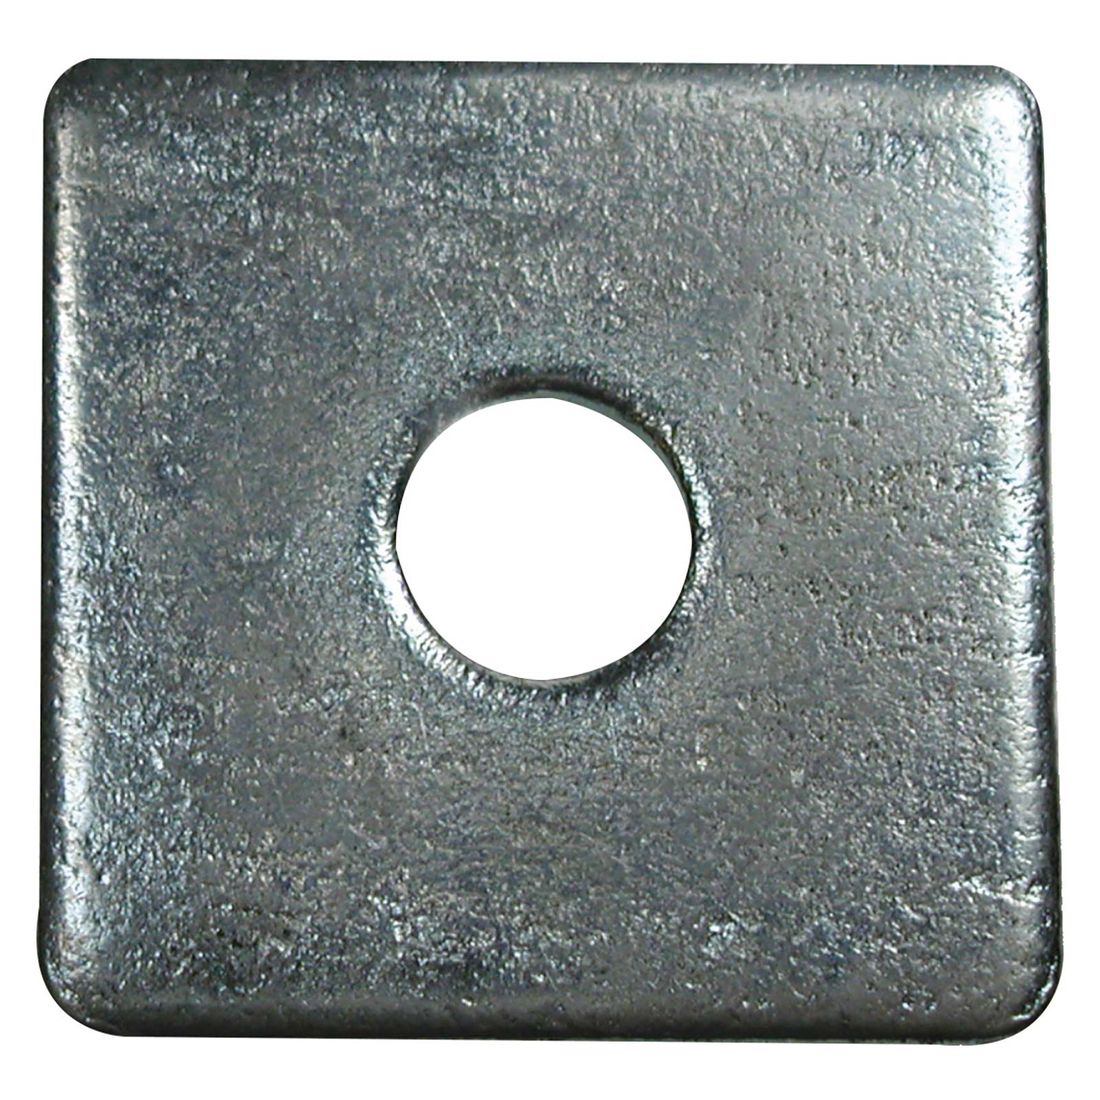 Unifix Square Plate Washer Bzp 12 X 50Mm Pk8